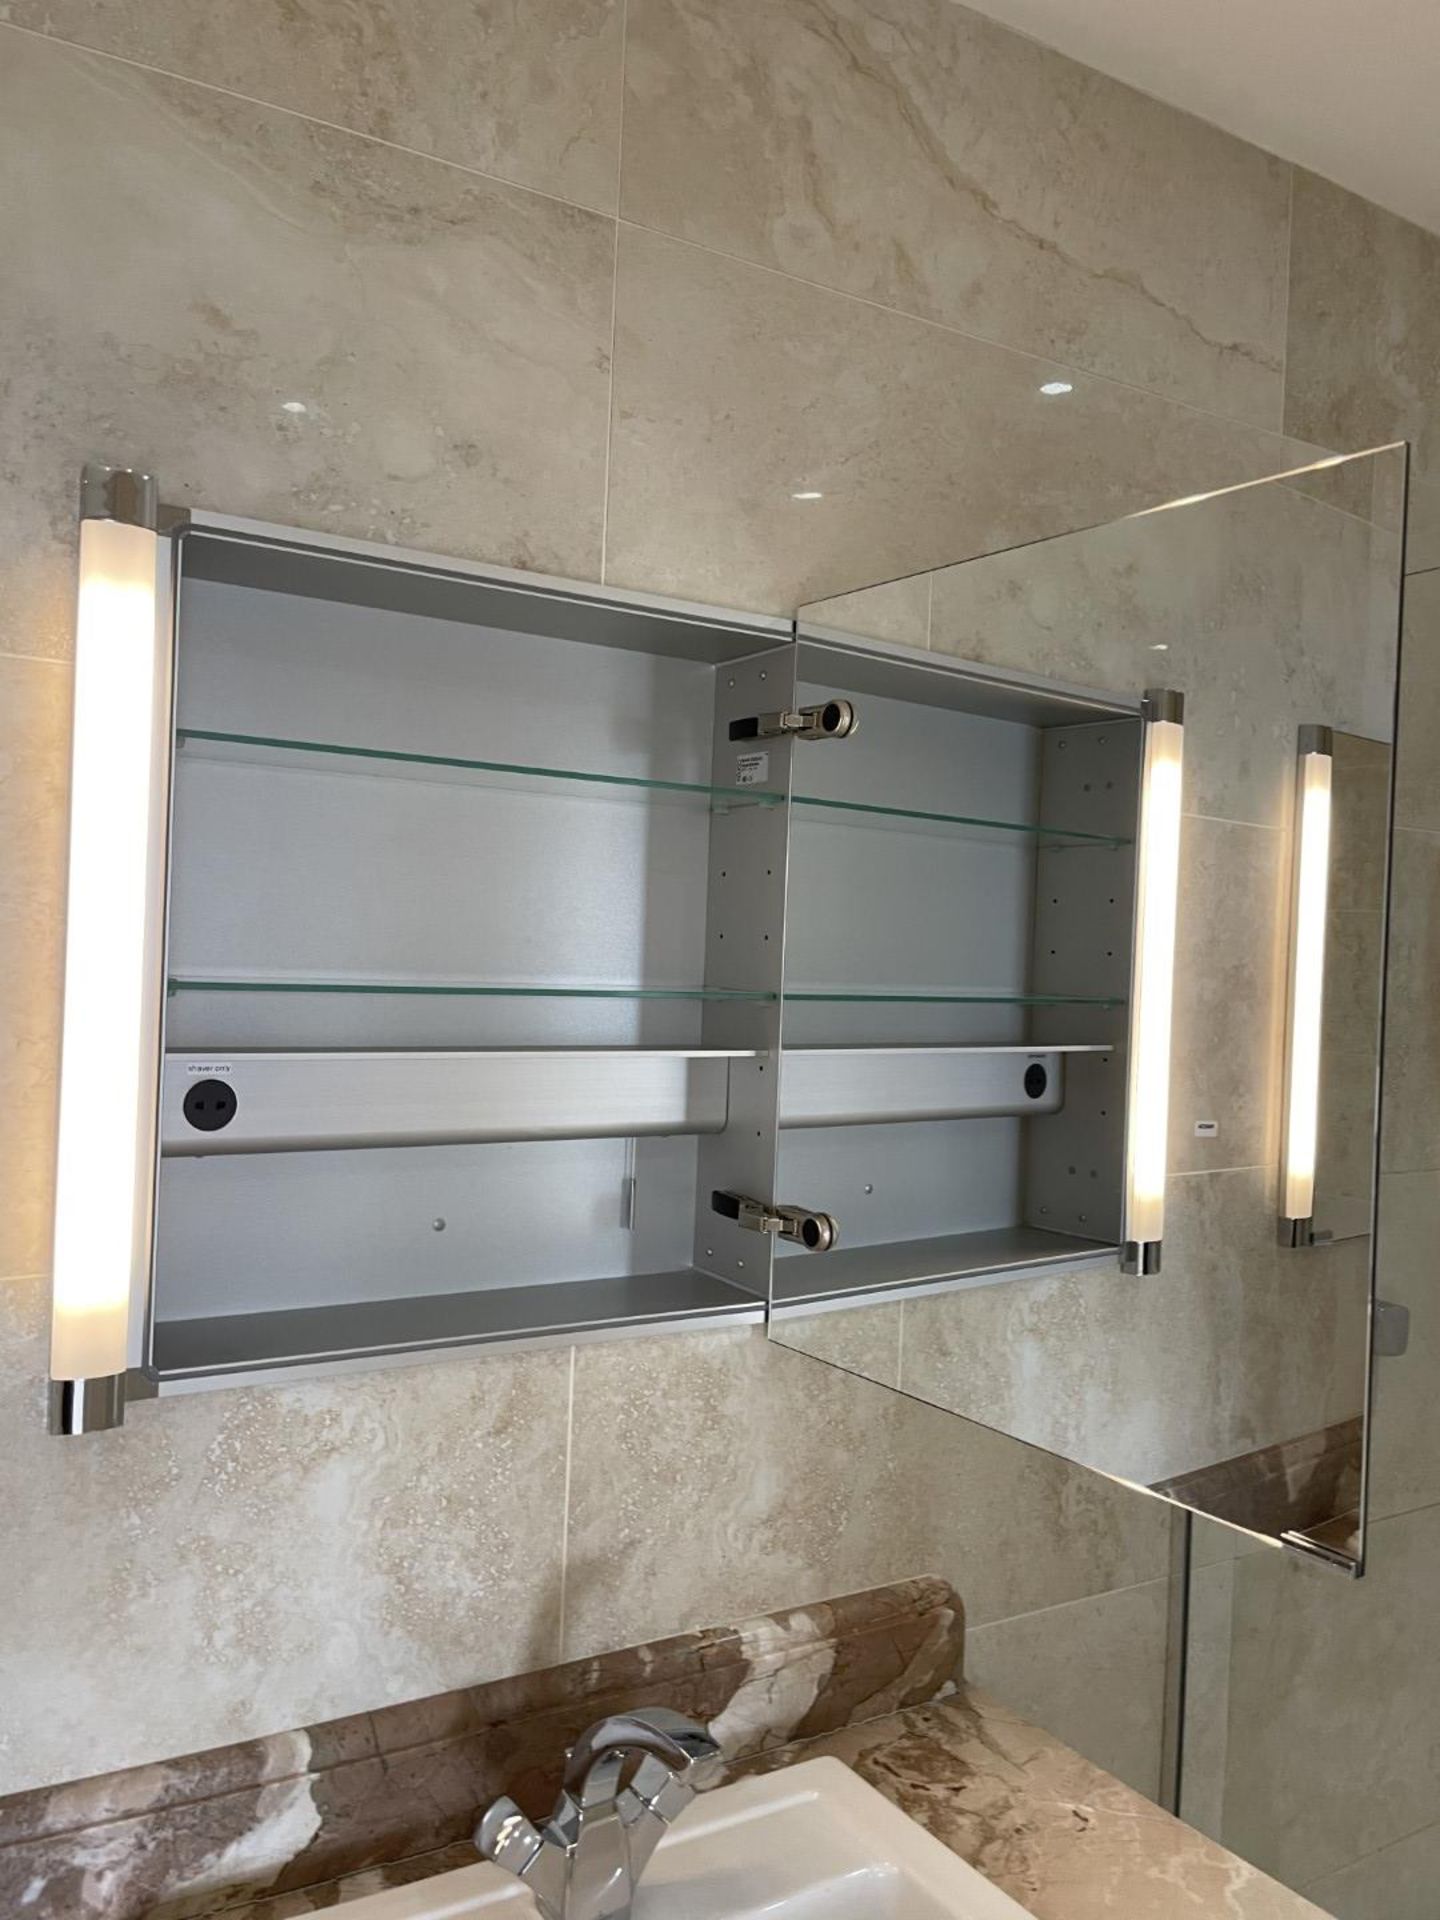 2 x KEUCO Illuminated Mirrored Wall Mounted Cabinets - Total Original Value: £2,000 - Ref: - Image 18 of 19